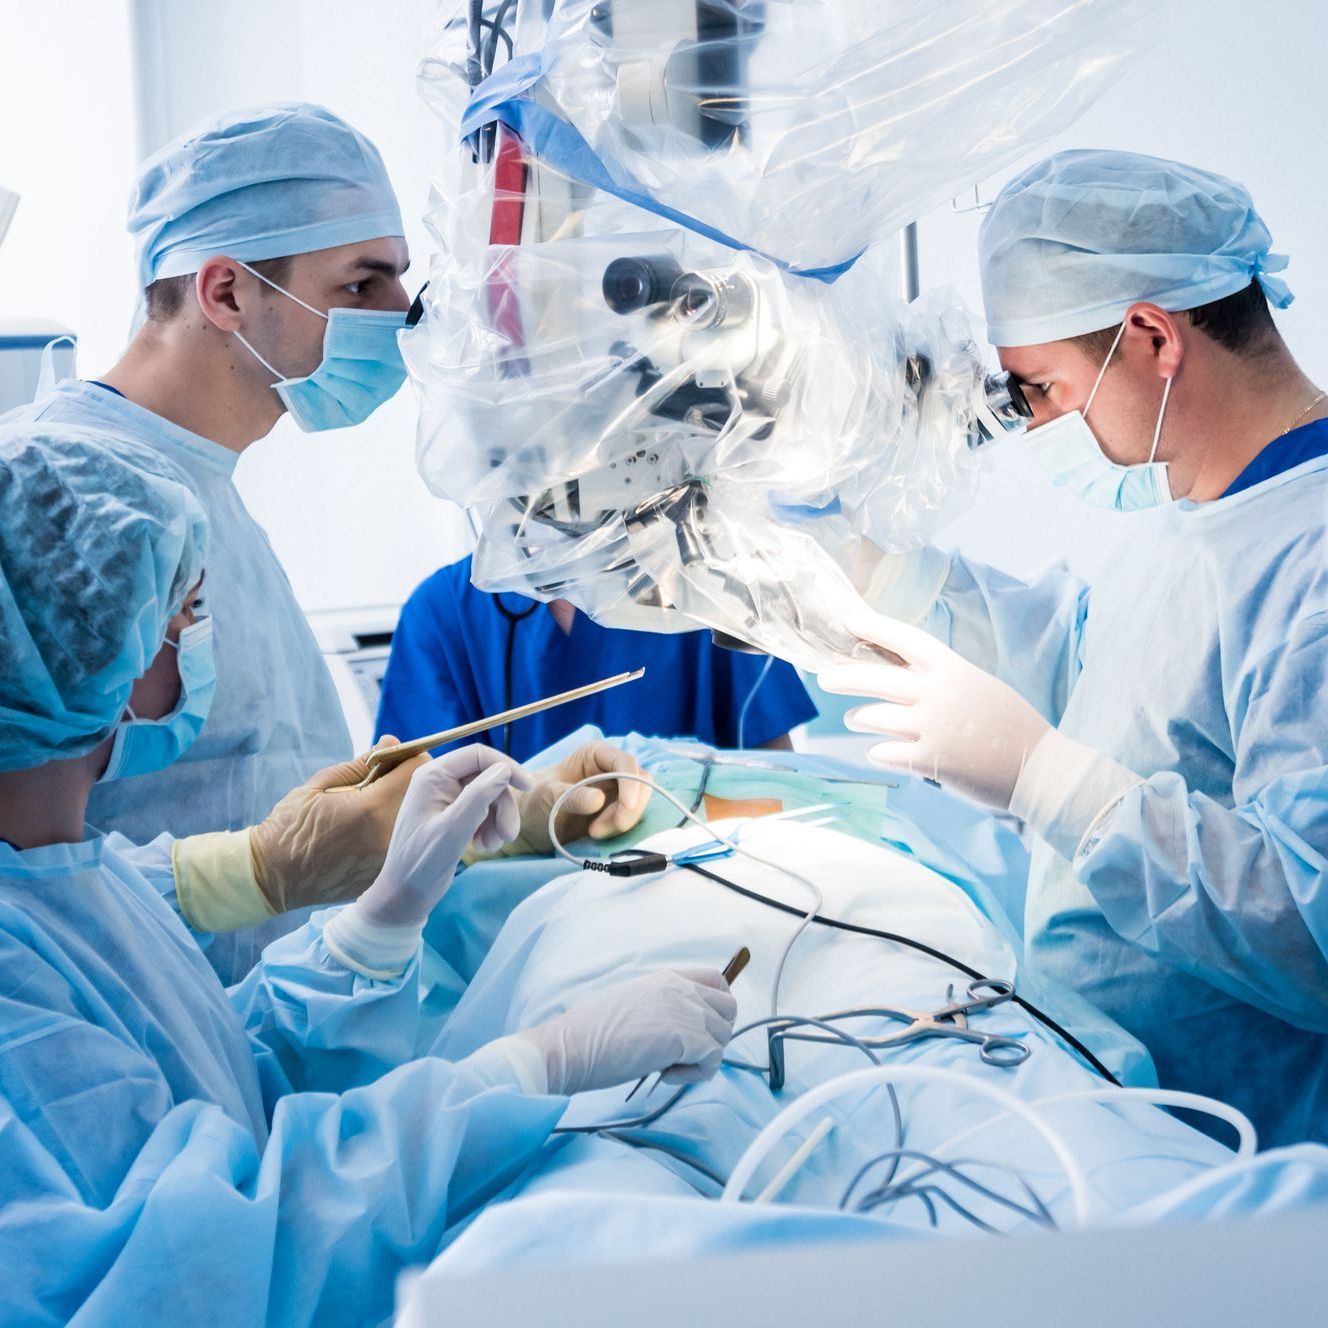 Spinal surgery. Group of surgeons in operating room with surgery equipment. Laminectomy. Modern medical background.